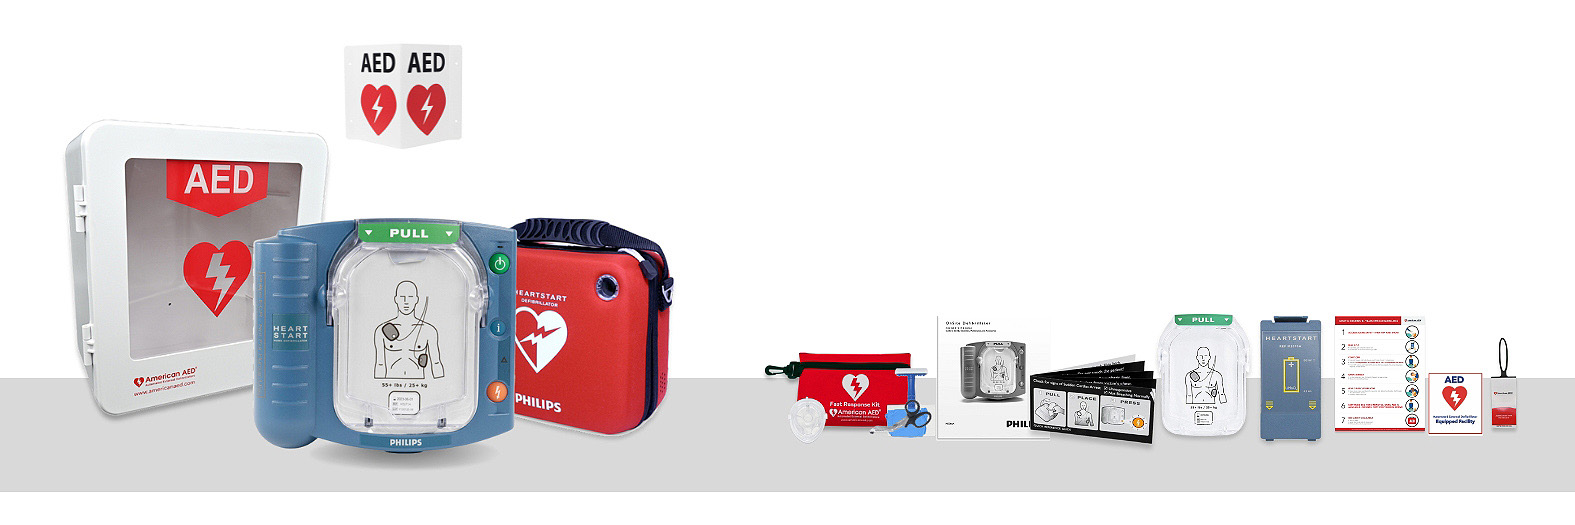 AED Defibrillator Workplace / Business / Office Package